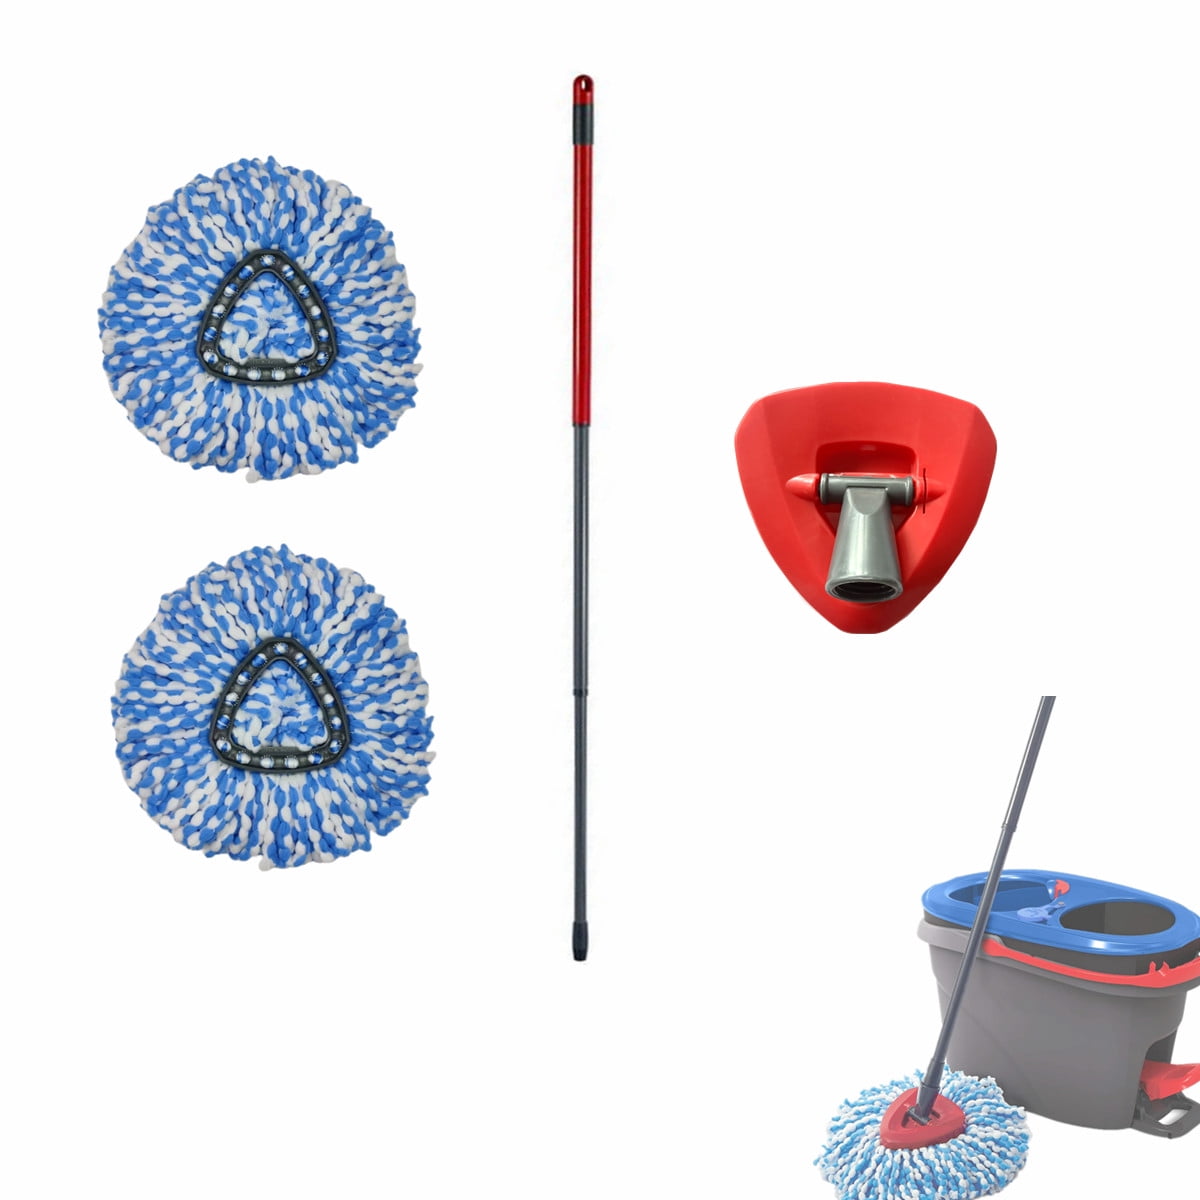  4 Pack Spin Mop Refills with 1 Mop Base- Microfiber Spin Mop  Replacement Head Compatible with Ocedar EasyWring RinseClean 2 Tank Bucket  System, Easy Cleaning Mop Head Replacement : Health & Household